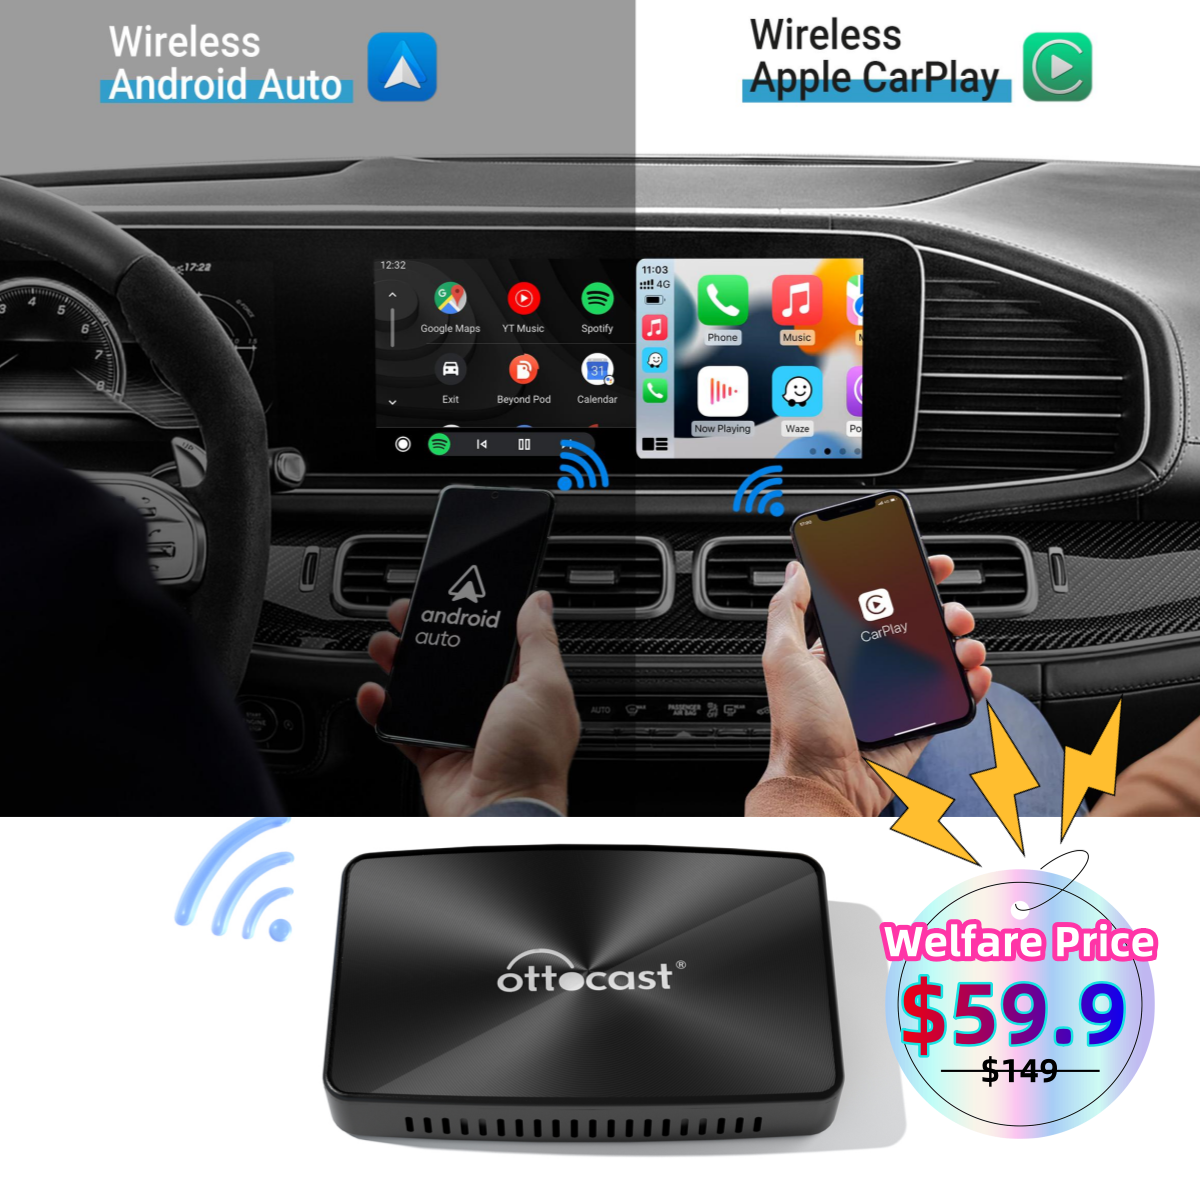 💥Welfare Activities-Lowest Price Only $59.9⏰New U2-X Pro Wireless Android Auto/CarPlay 2 in 1 Adapter